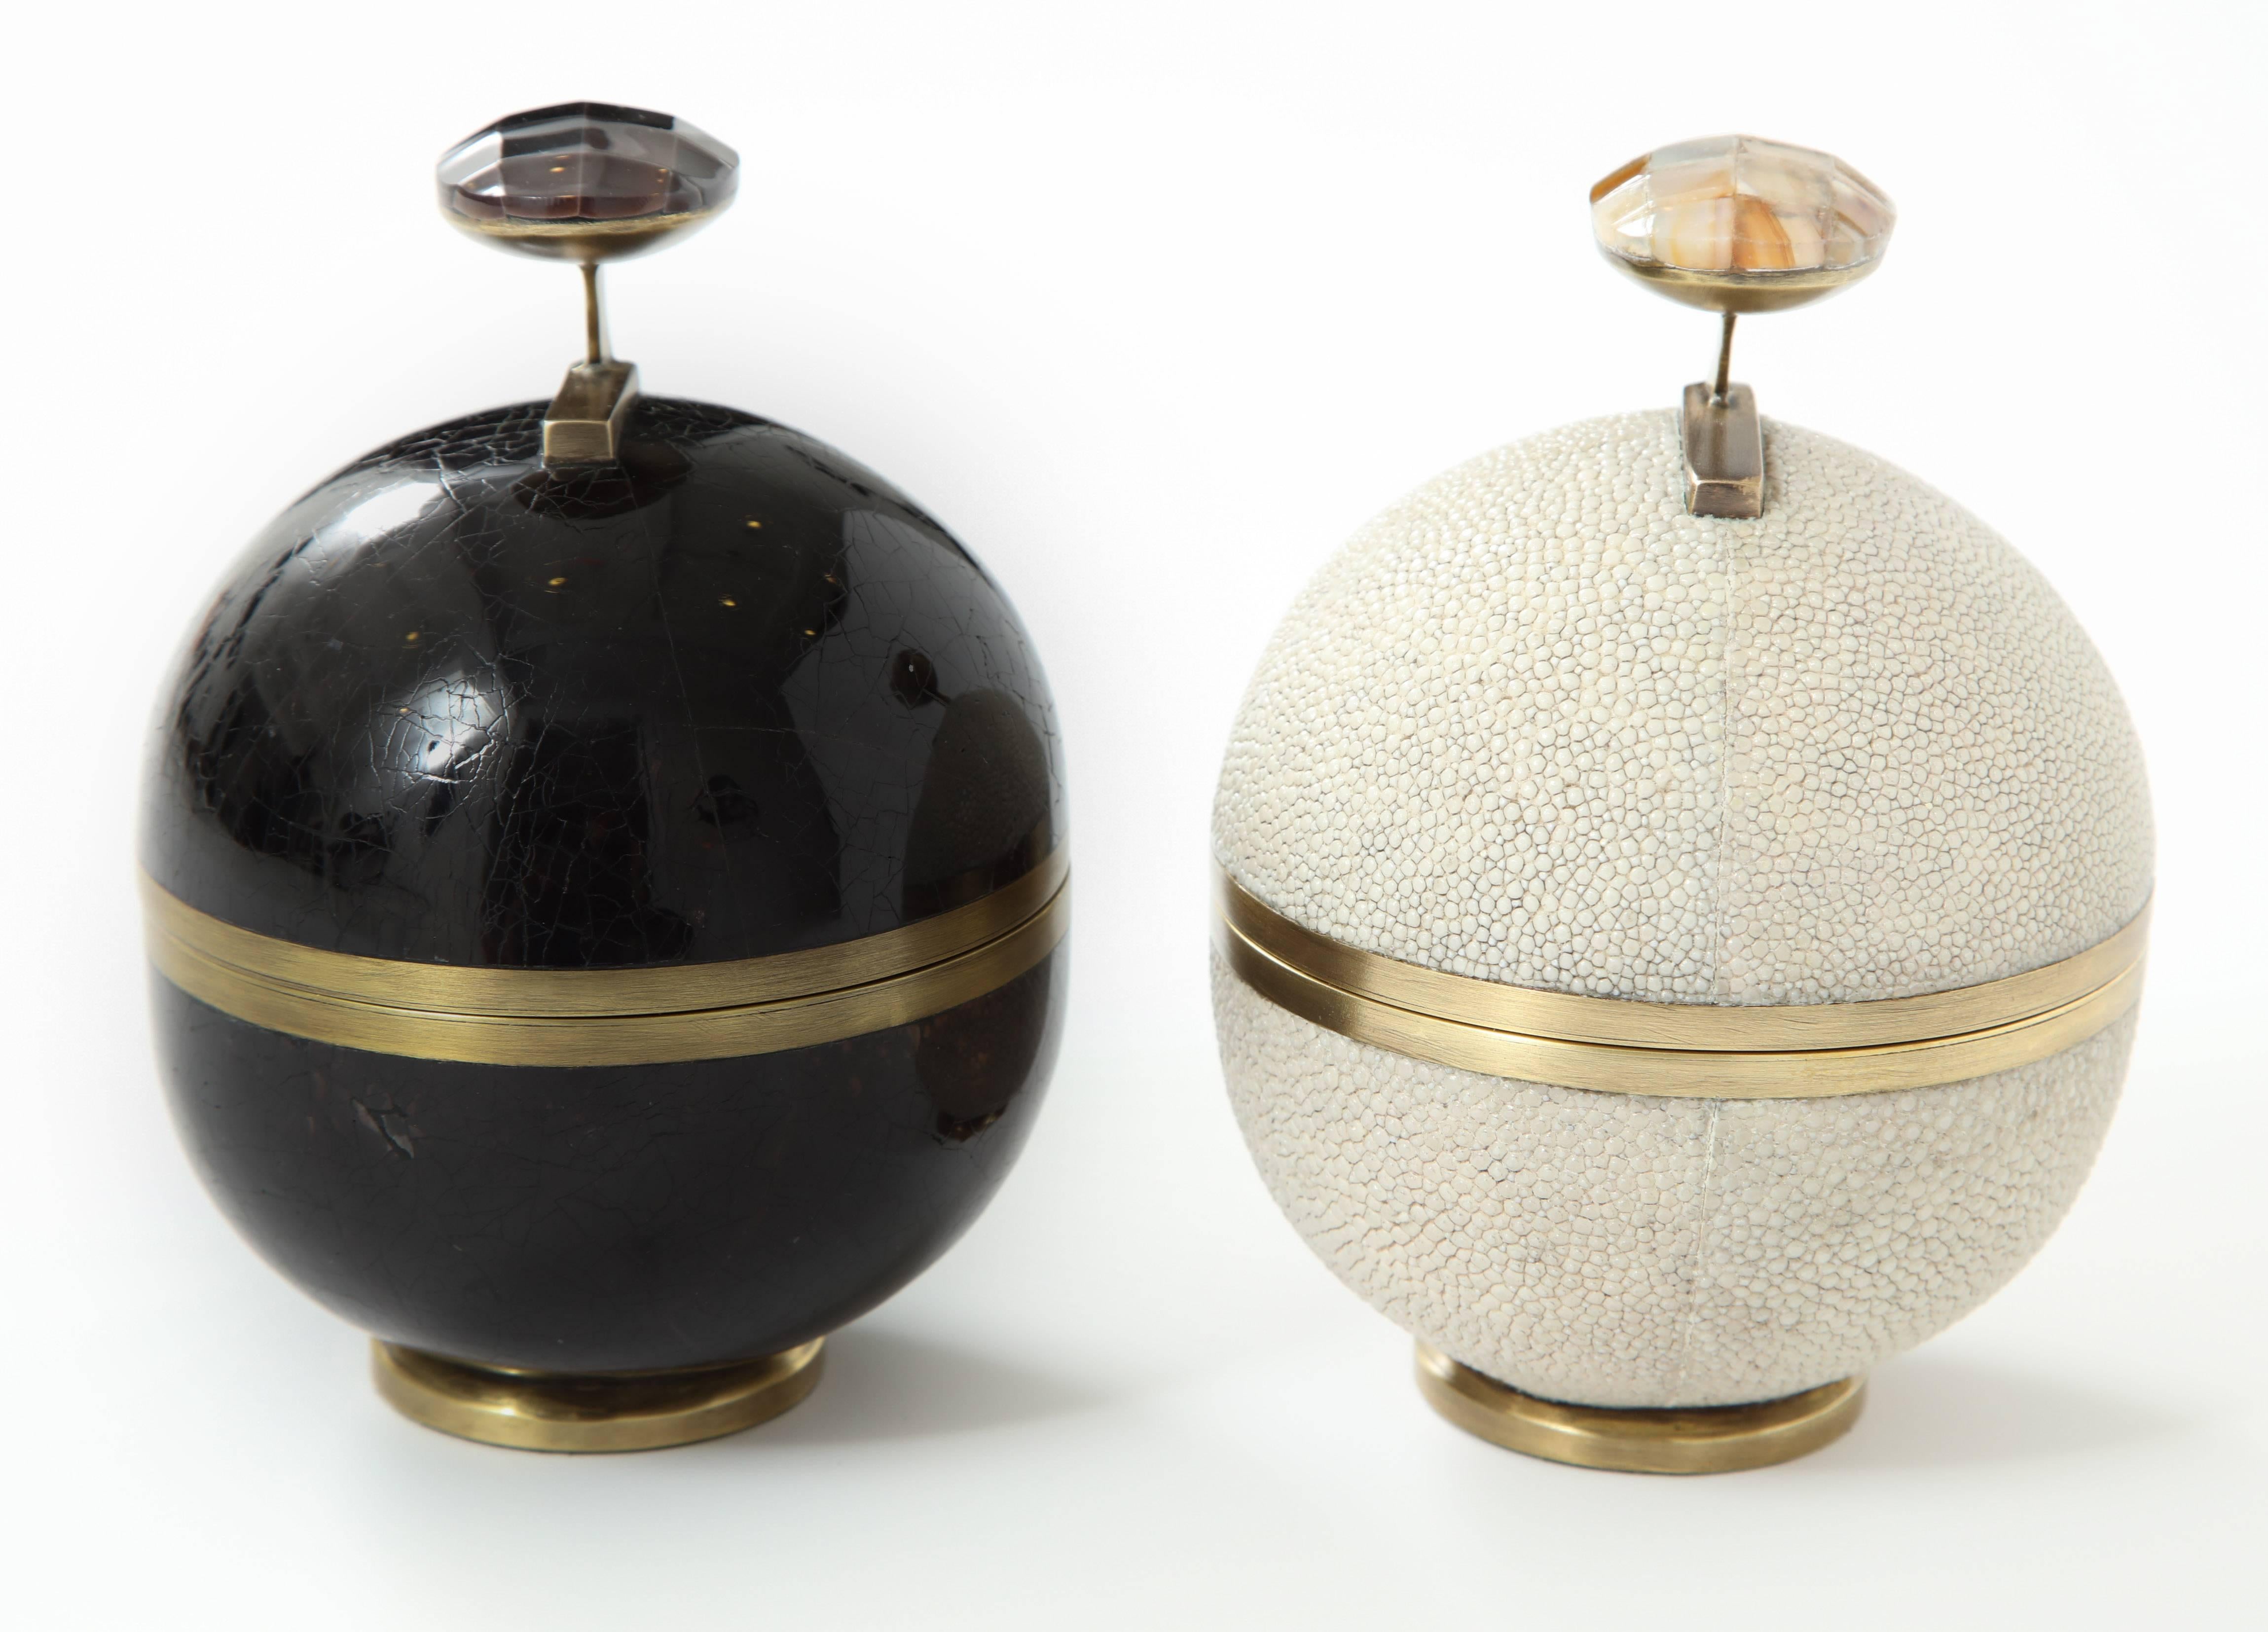 Pair of decorative boxes, shagreen and black sea shell with bronze details. Each box is priced at $495. The shagreen box is sold. France.